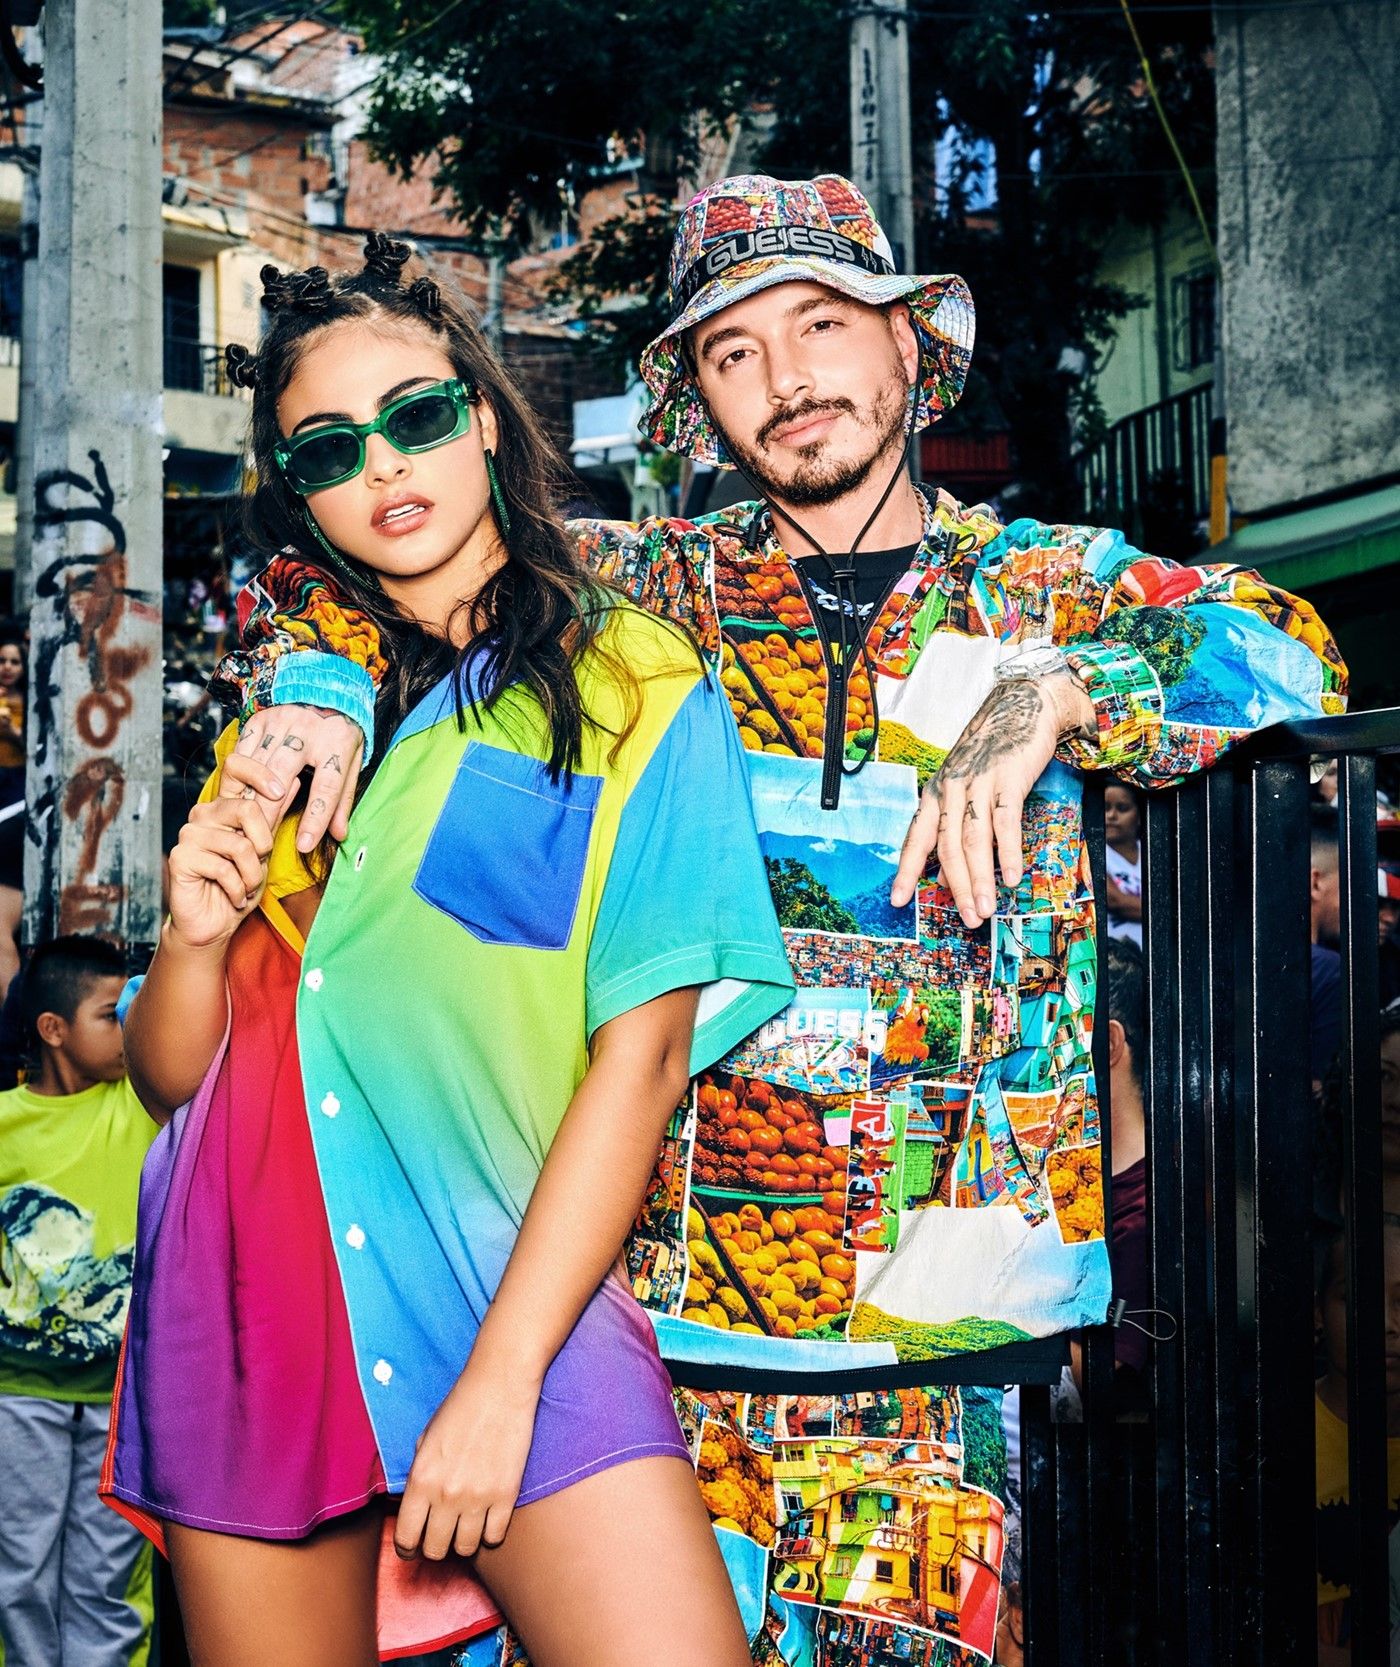 J. Balvin returns to Medellín to present his new collab with Guess